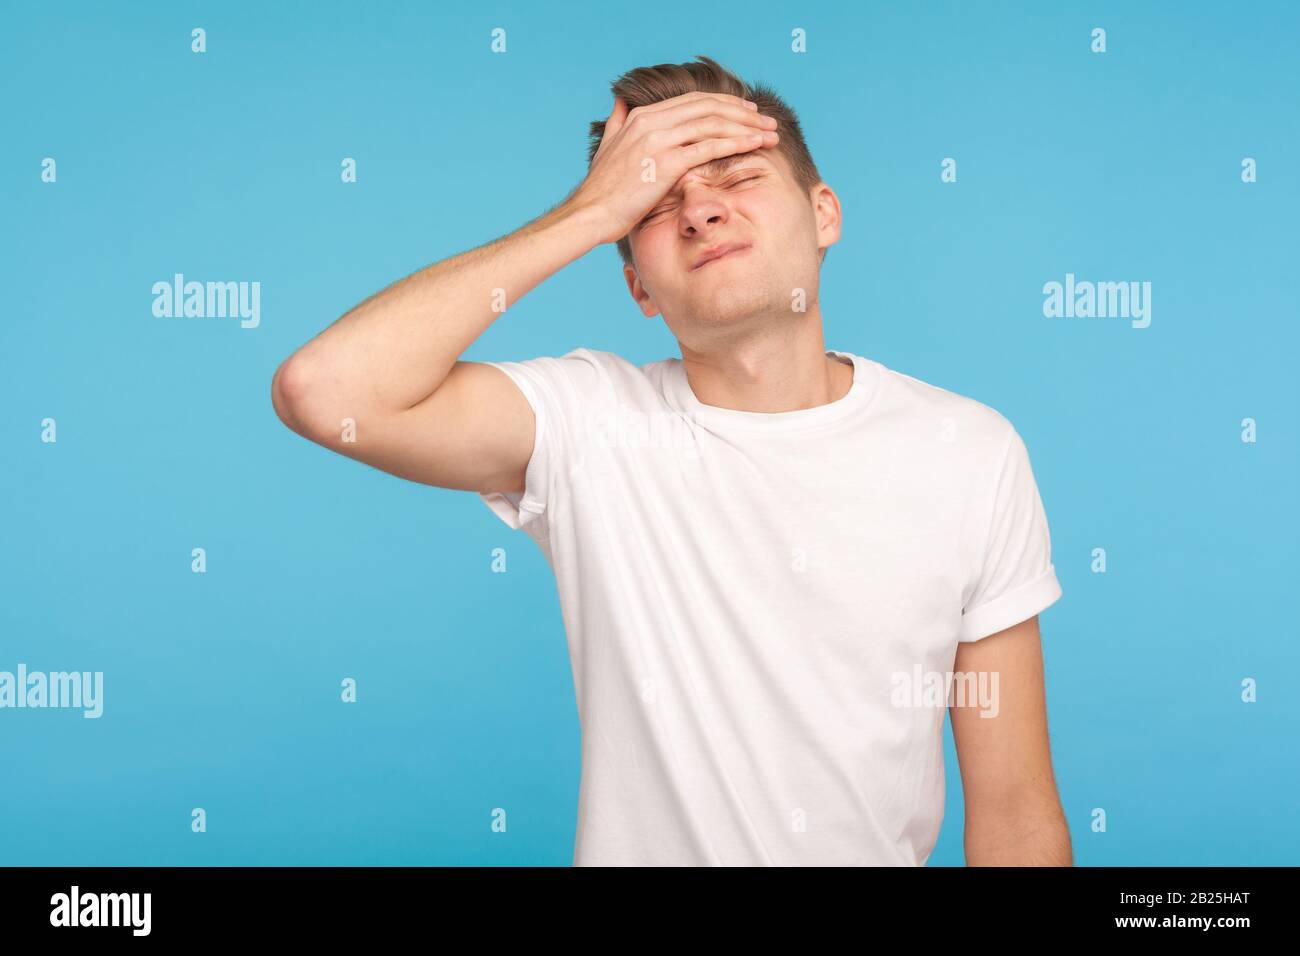 Oh no, I forgot! Portrait of unlucky man in casual white t-shirt making facepalm gesture, feeling regret and shame about forgotten event, bad memory. Stock Photo